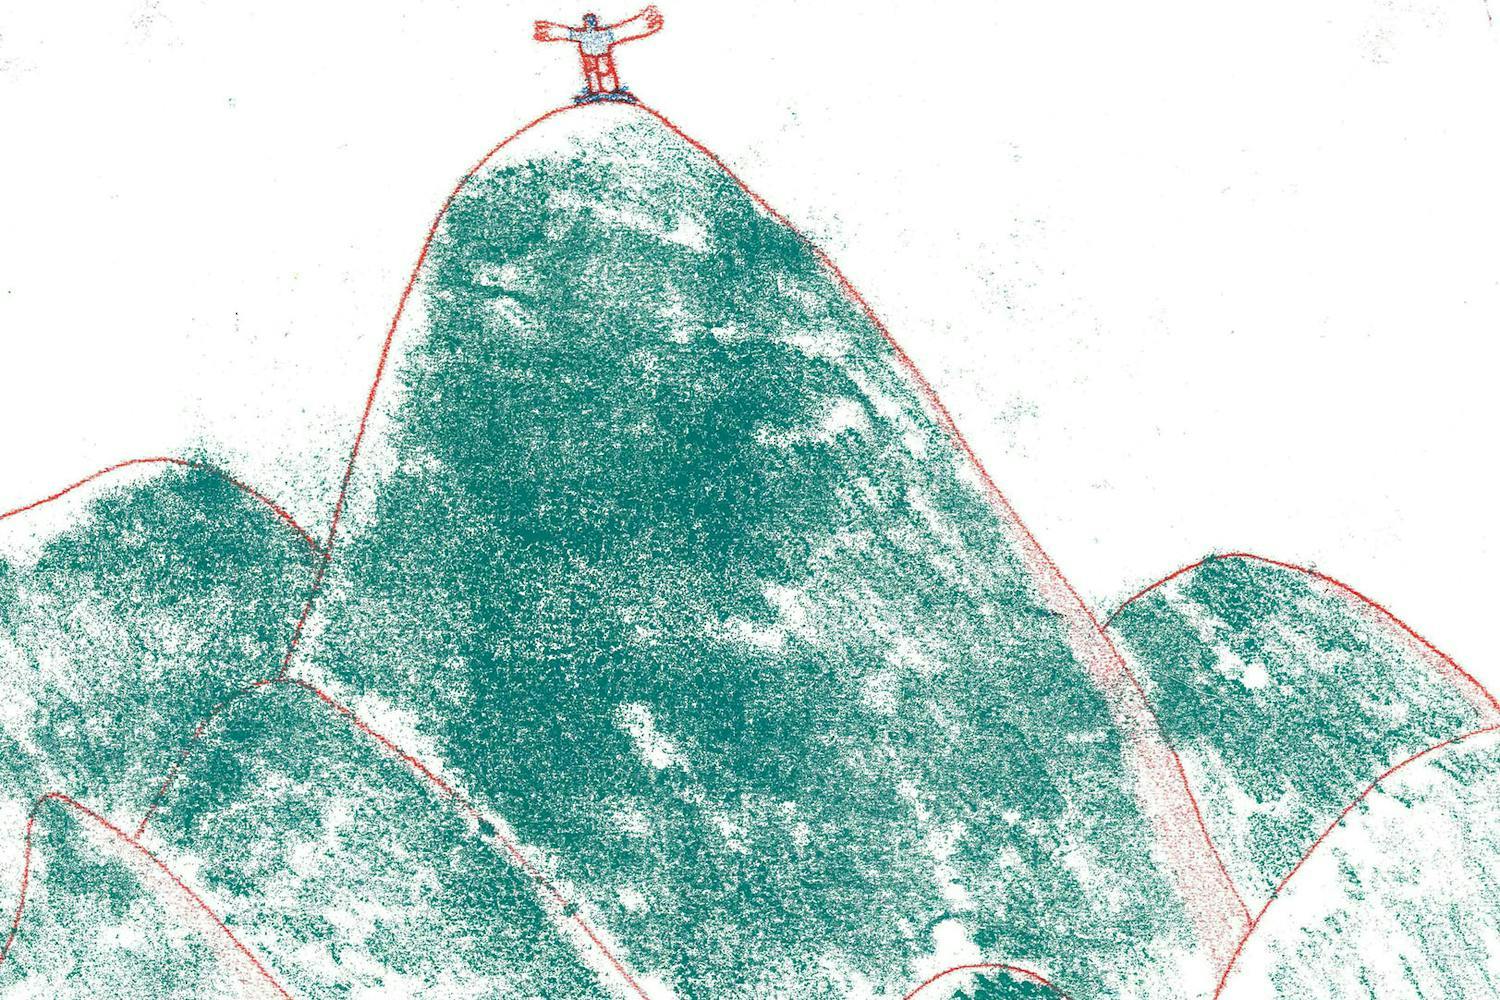 A monoprinted image of a person standing on top of a mountain with their arms outspread